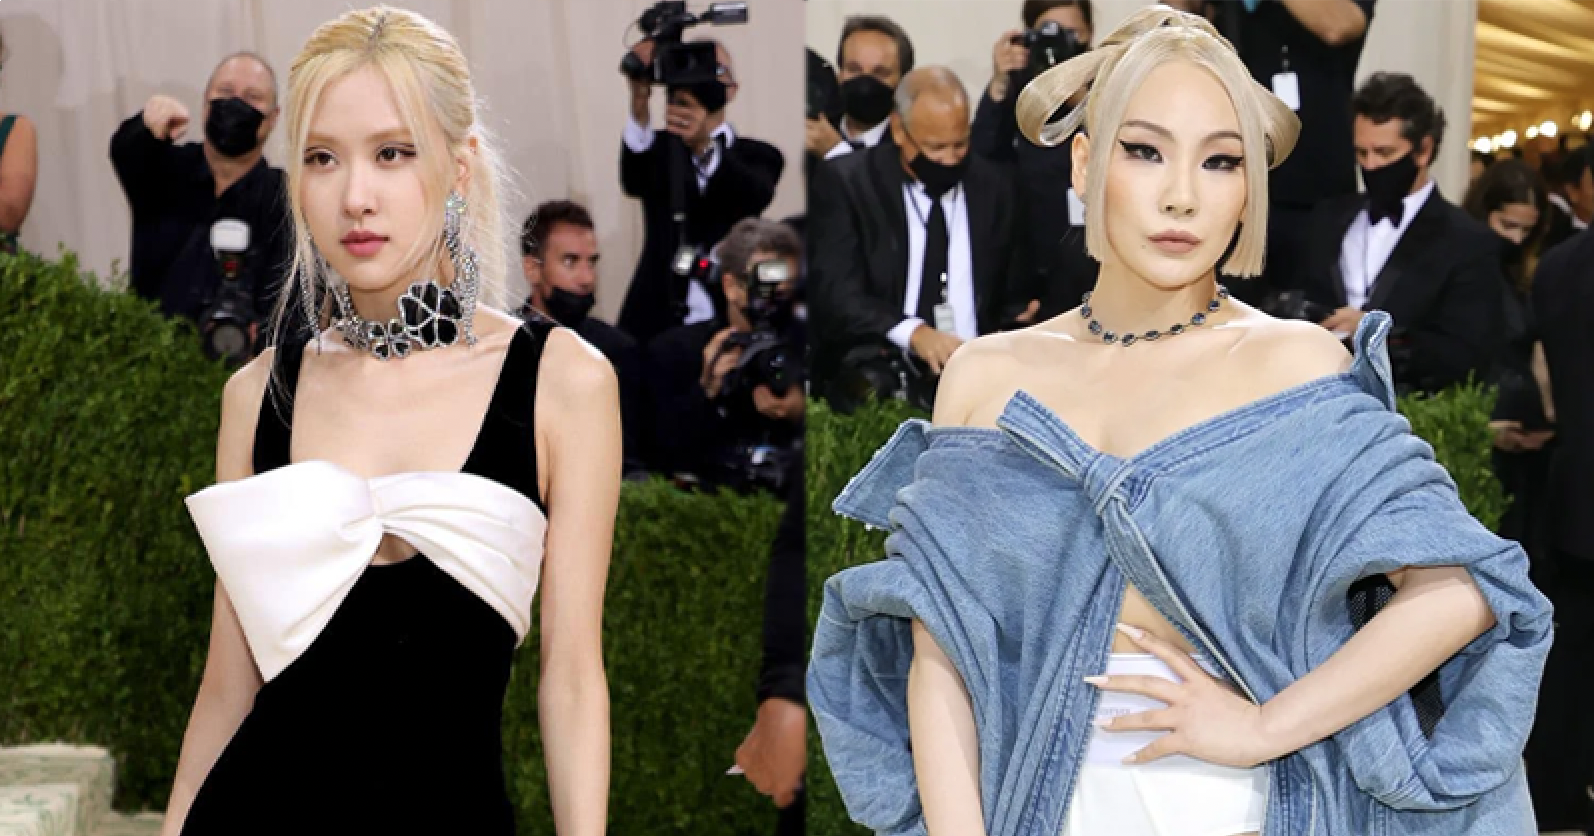 BLACKPINK Rosé and CL at Met Gala 2021: Whose Outfit Shone Brighter?